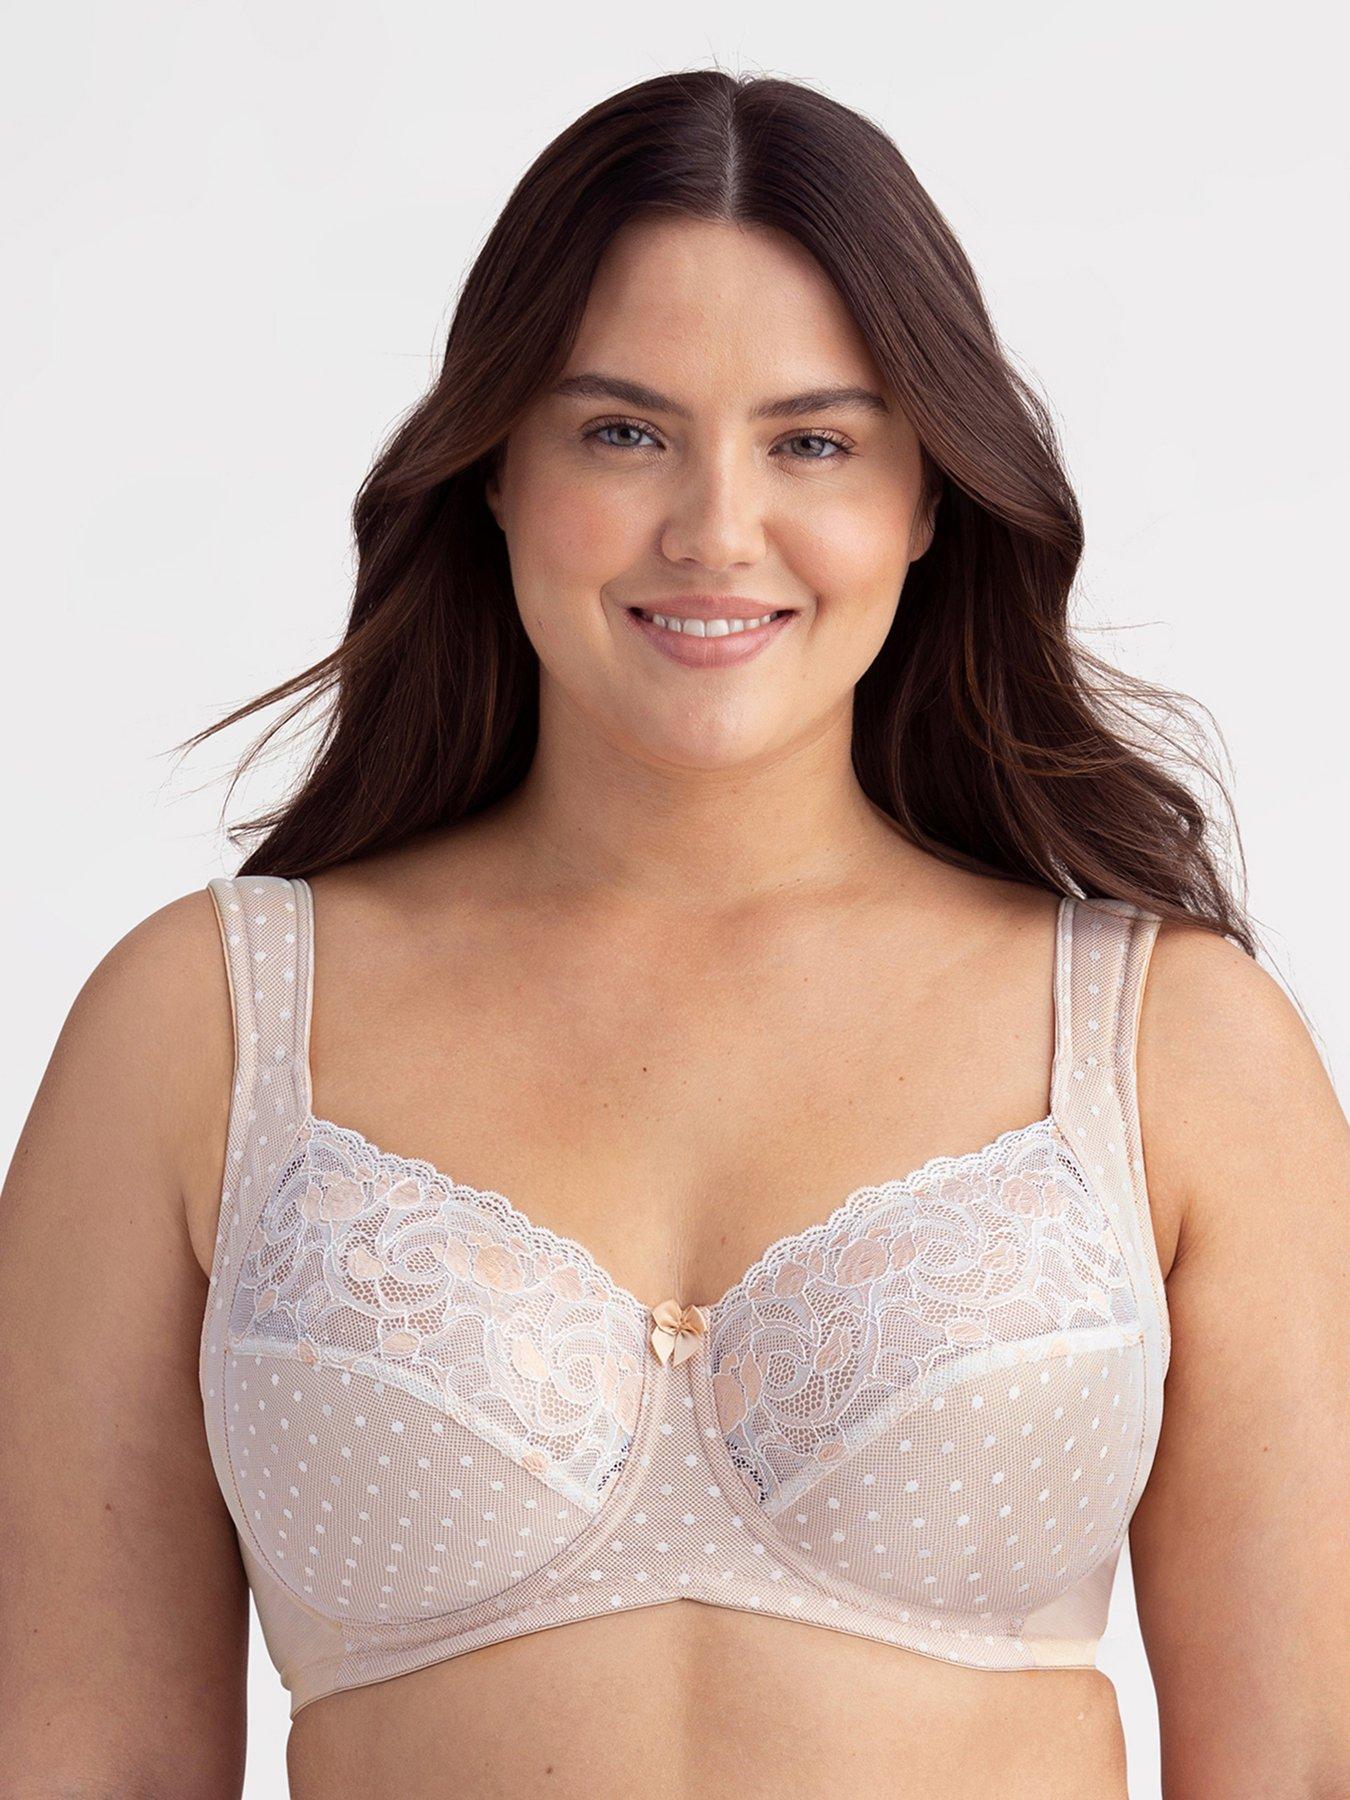 New Catherines Plus Size Full Coverage Smooth Underwire Bra Blue Pink Bow